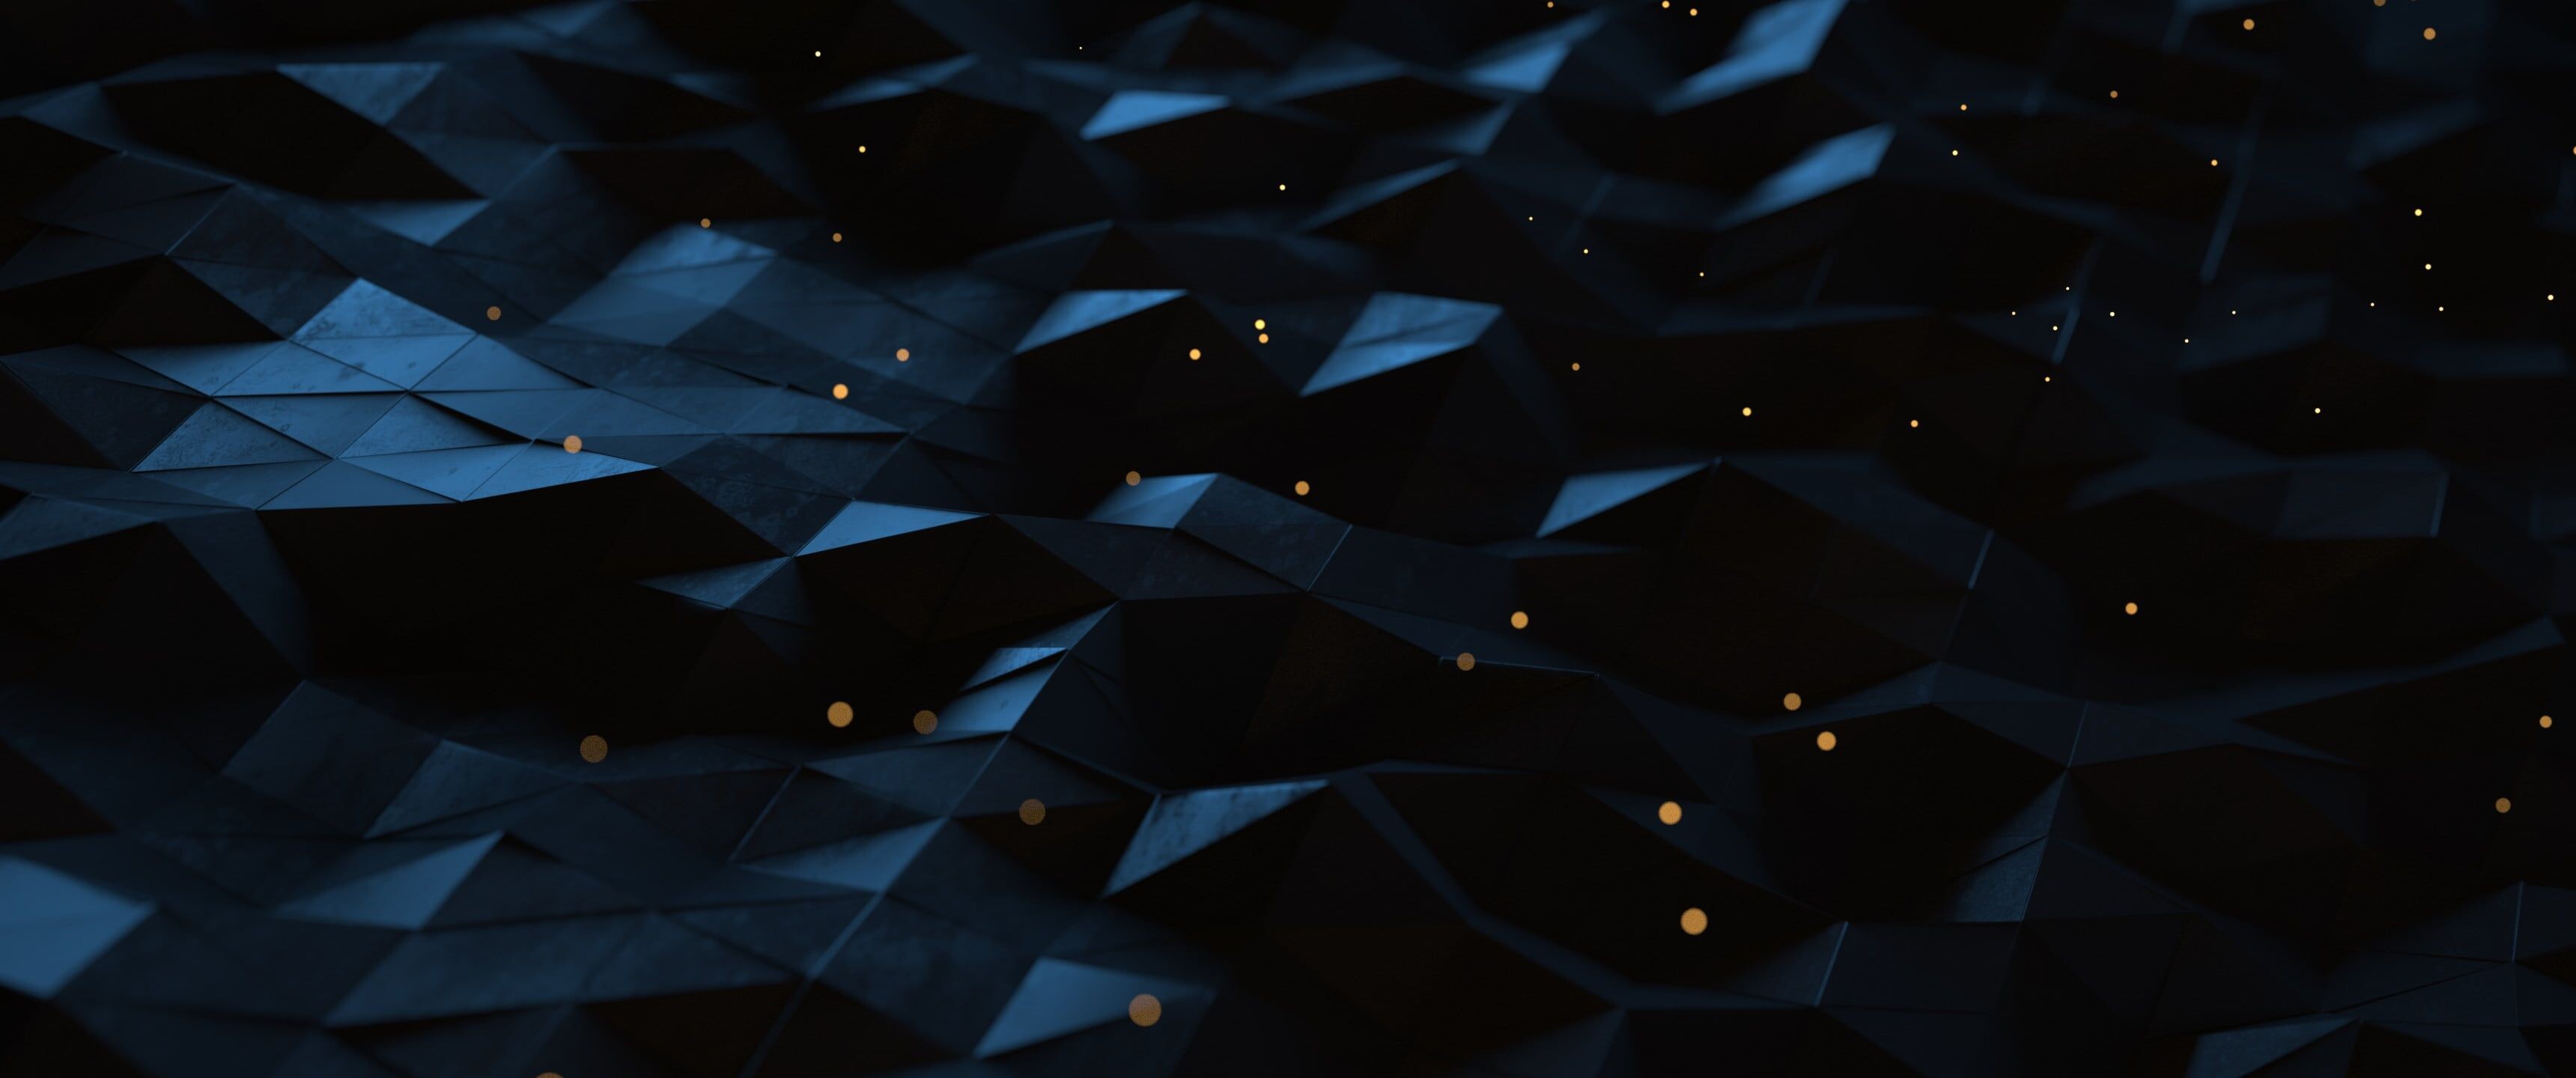 Geometric Abstract: Trapezoids, Three-dimensional shape, Acute angles. 3440x1440 Dual Screen Background.